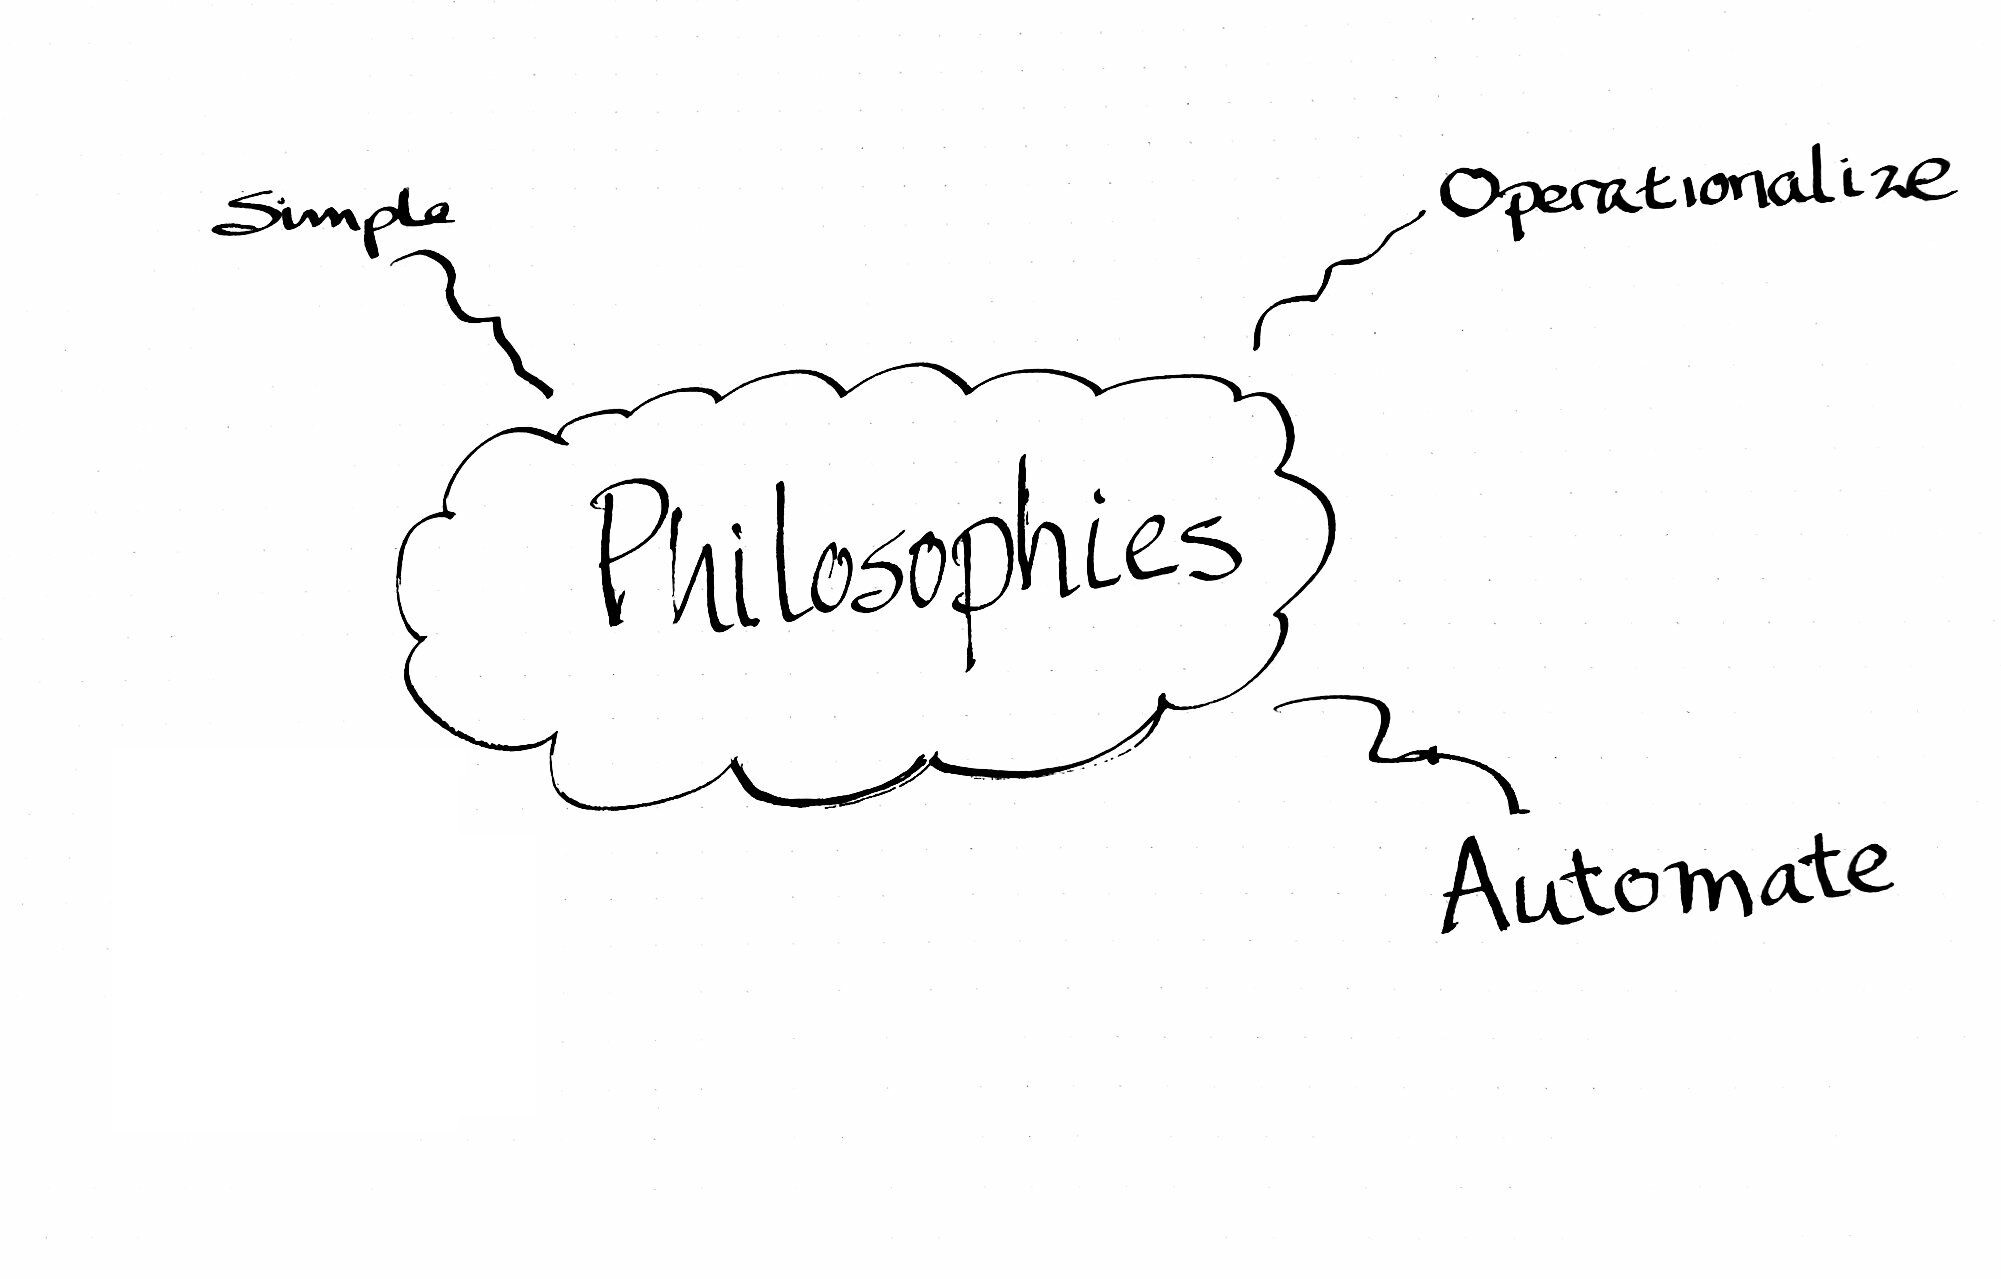 06-23-philosophies-automate.md